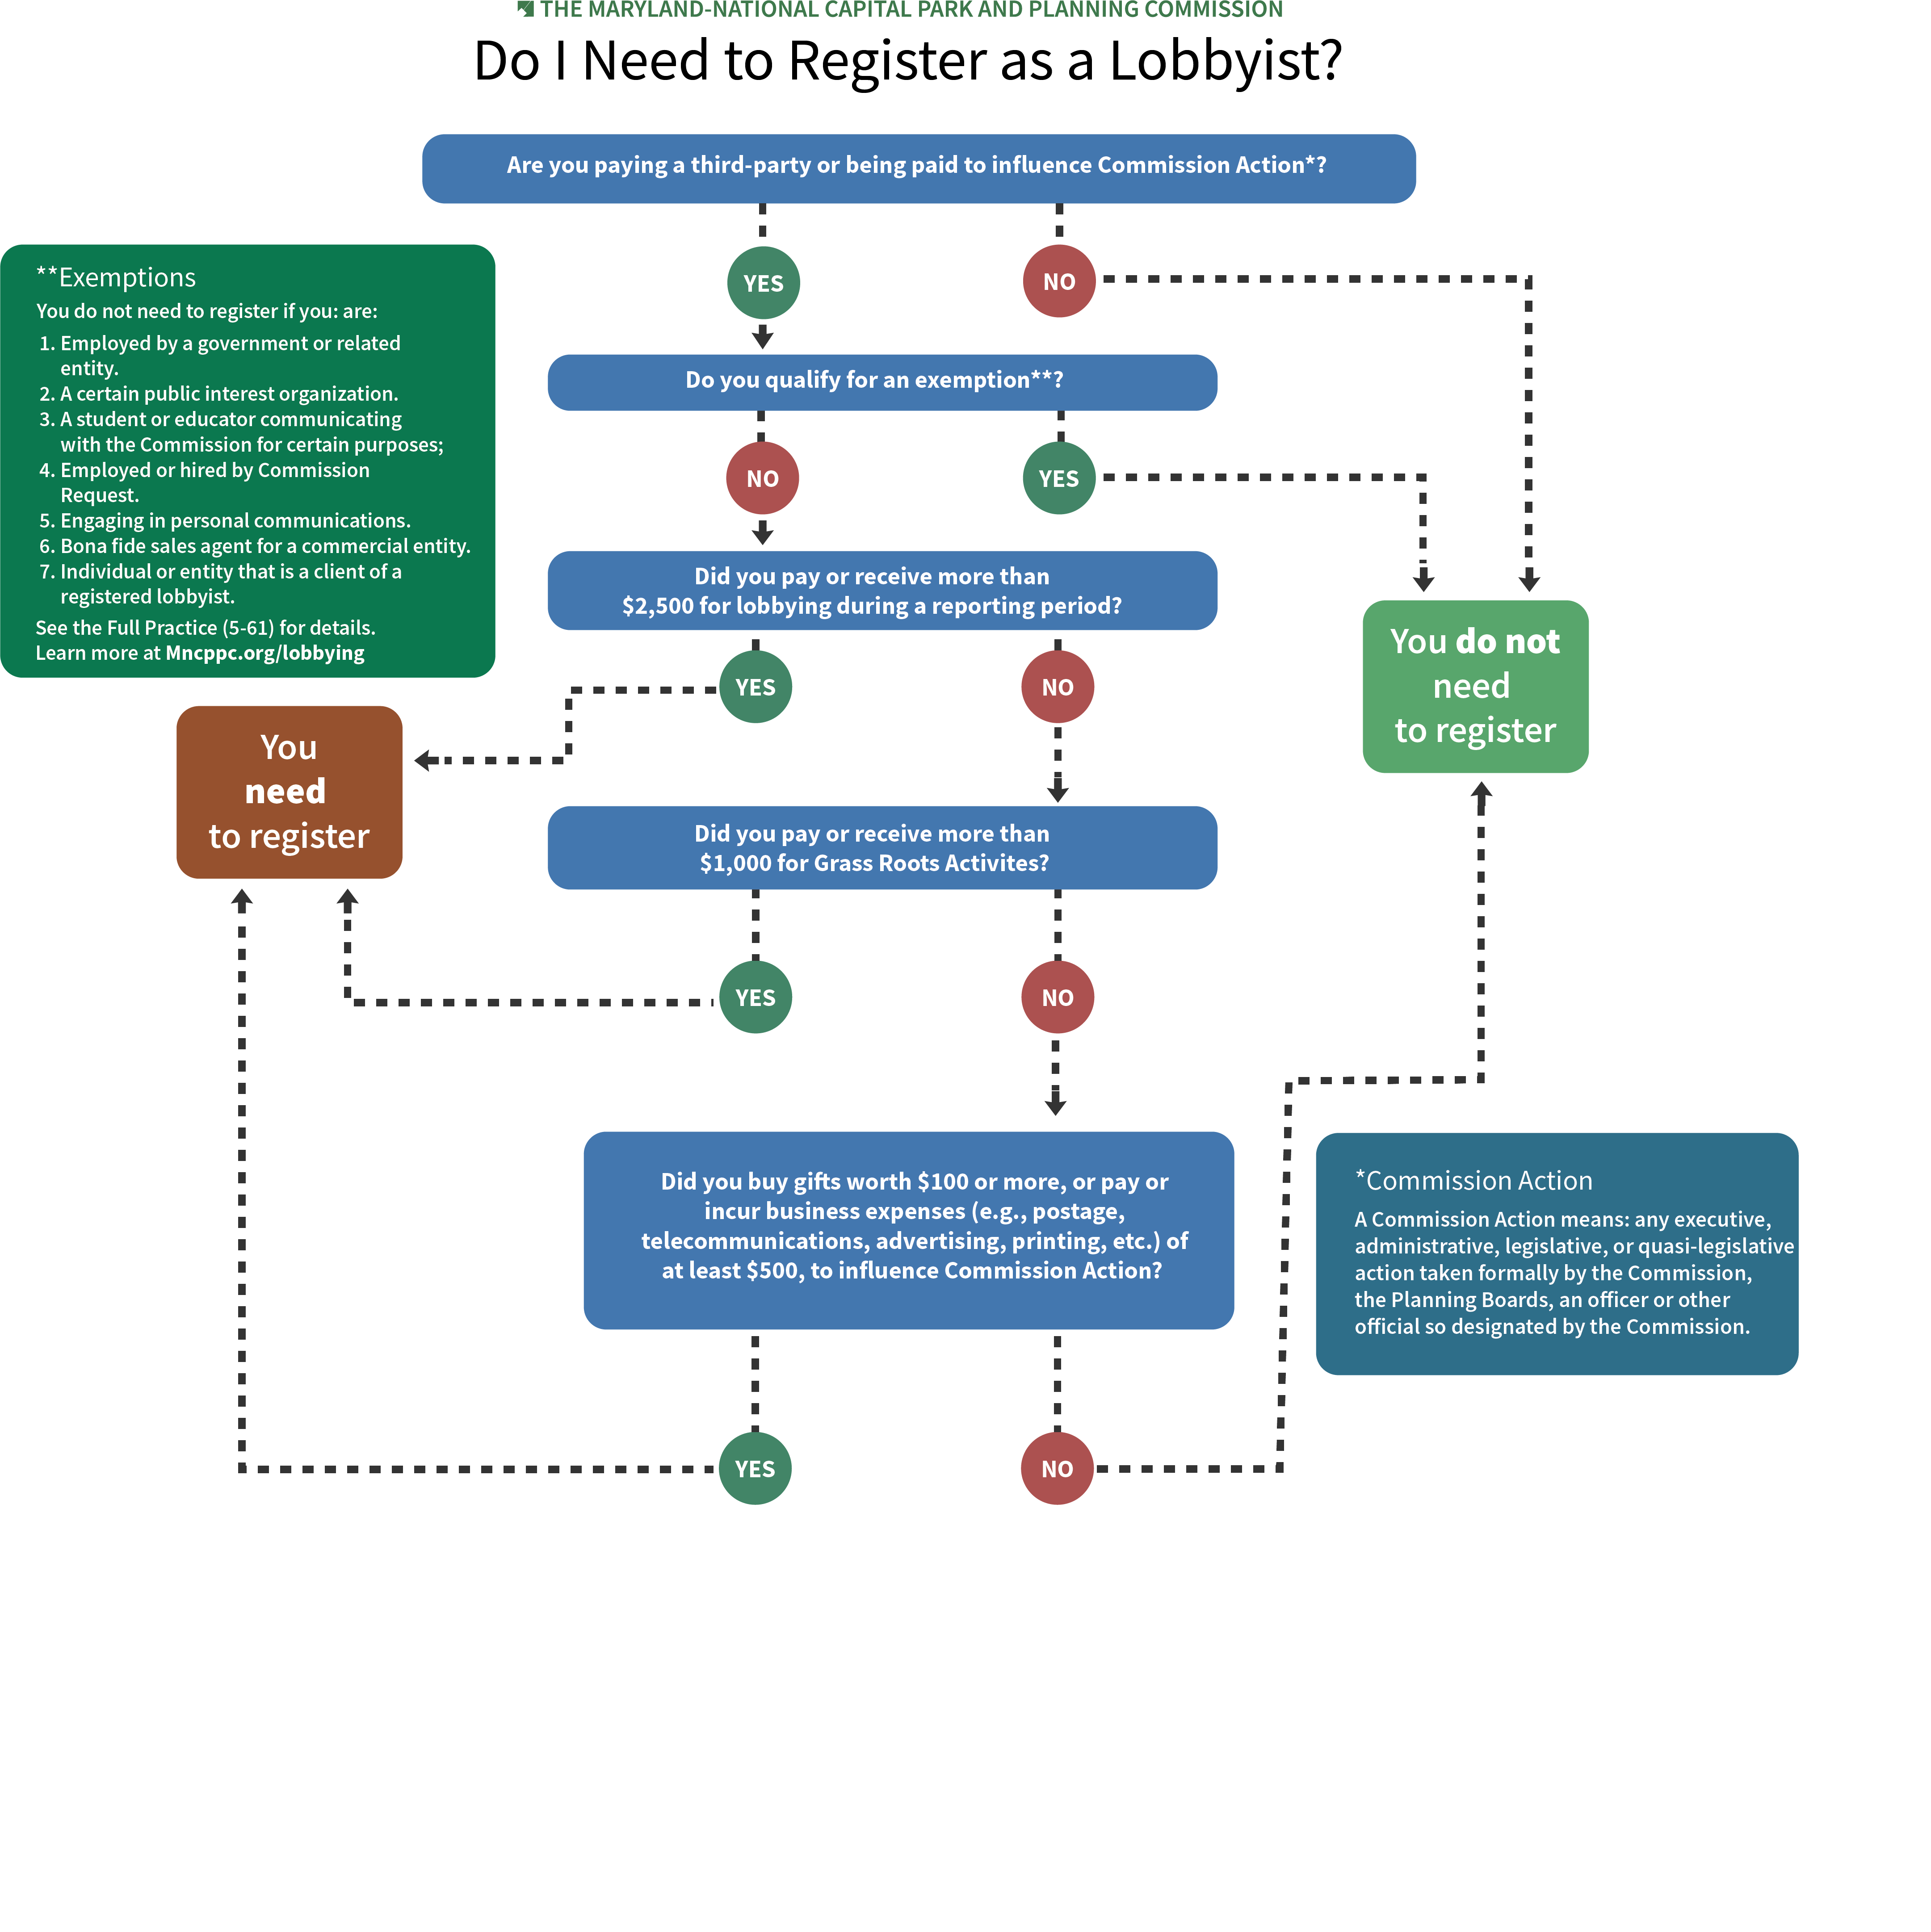 Do I need to register as a lobbyist? Are you paying a third-arty or being paid to influence Commission Action? If no, you do not need to register. If yes, do you qualify for an exemption? If you do qualify as an exemption, you do not need to register If you do not qualify for an exemption, did you pay or receive more than $2,500 for lobbying during a reporting period? If yes, you must register as a lobbyist. If no, did you pay or receive more than $1,000 for Grass Roots Activities. If yes, you need to register as a lobbyist. If no, did you buy gifts worth $100 or pay or incur business expenses or at least $500 to influence Commission Action? If yes, you must register as a lobbyist. If no, you do not need to register as a lobbyist.